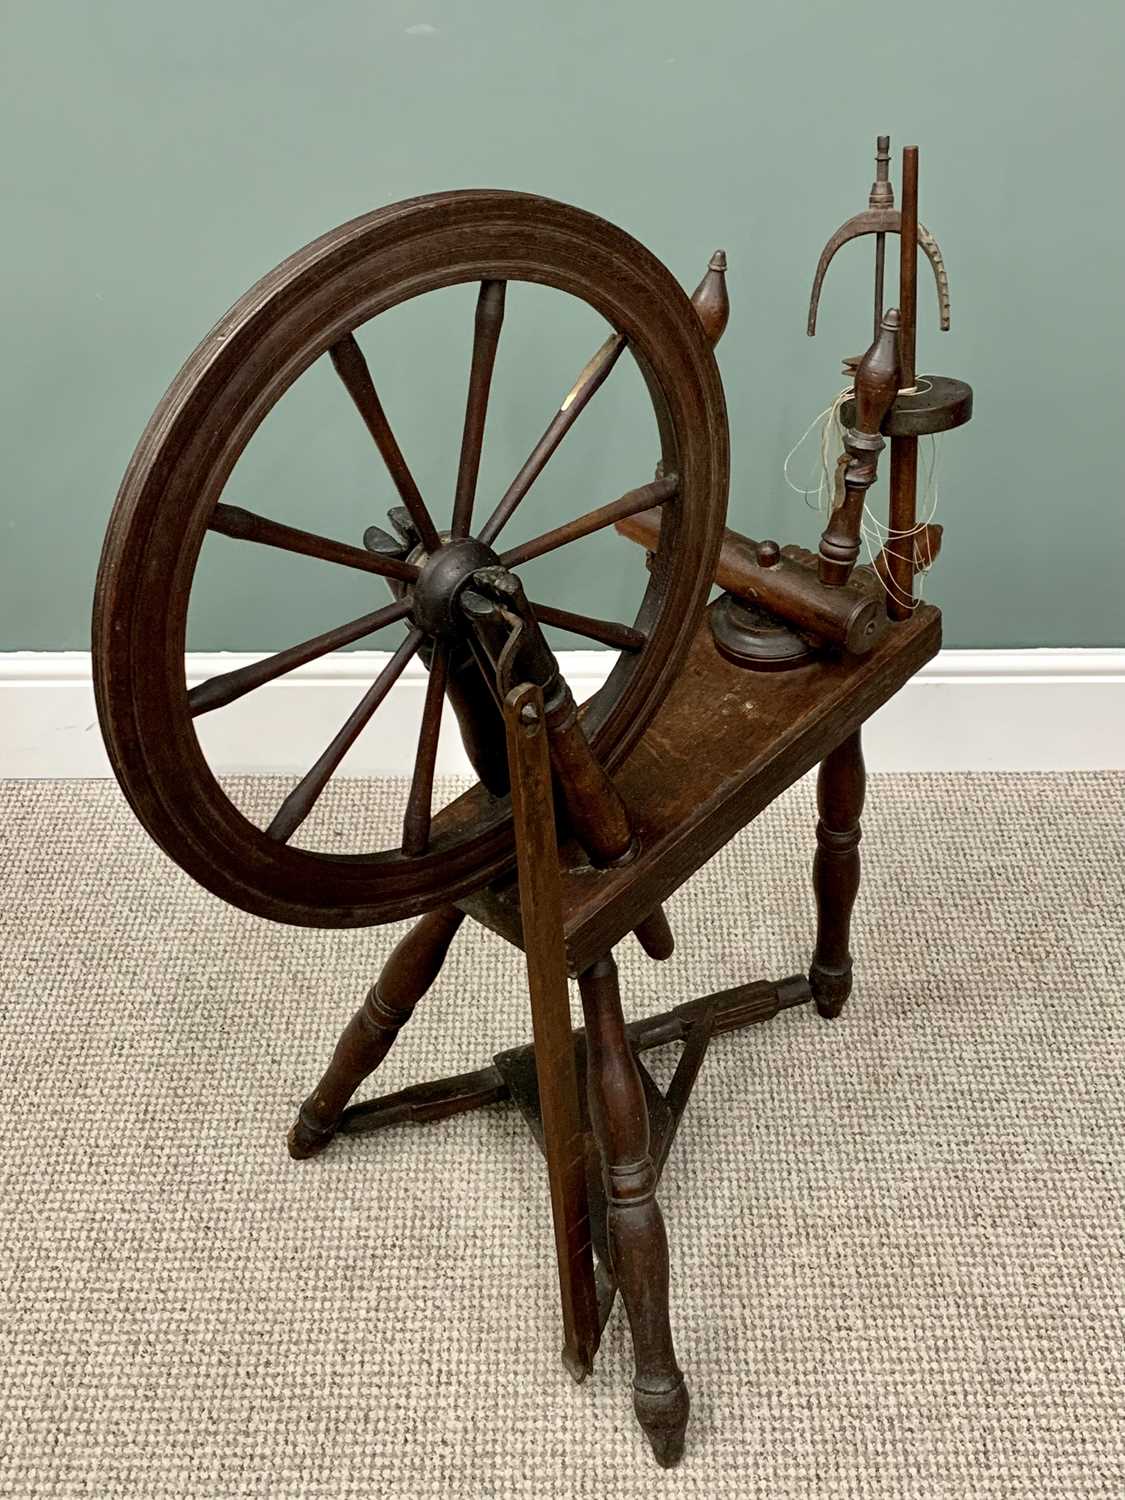 LATE 18TH CENTURY MIXED WOOD SPINNING WHEEL, 97cms overall H, 86cms W, 50cms max. D - Image 2 of 4